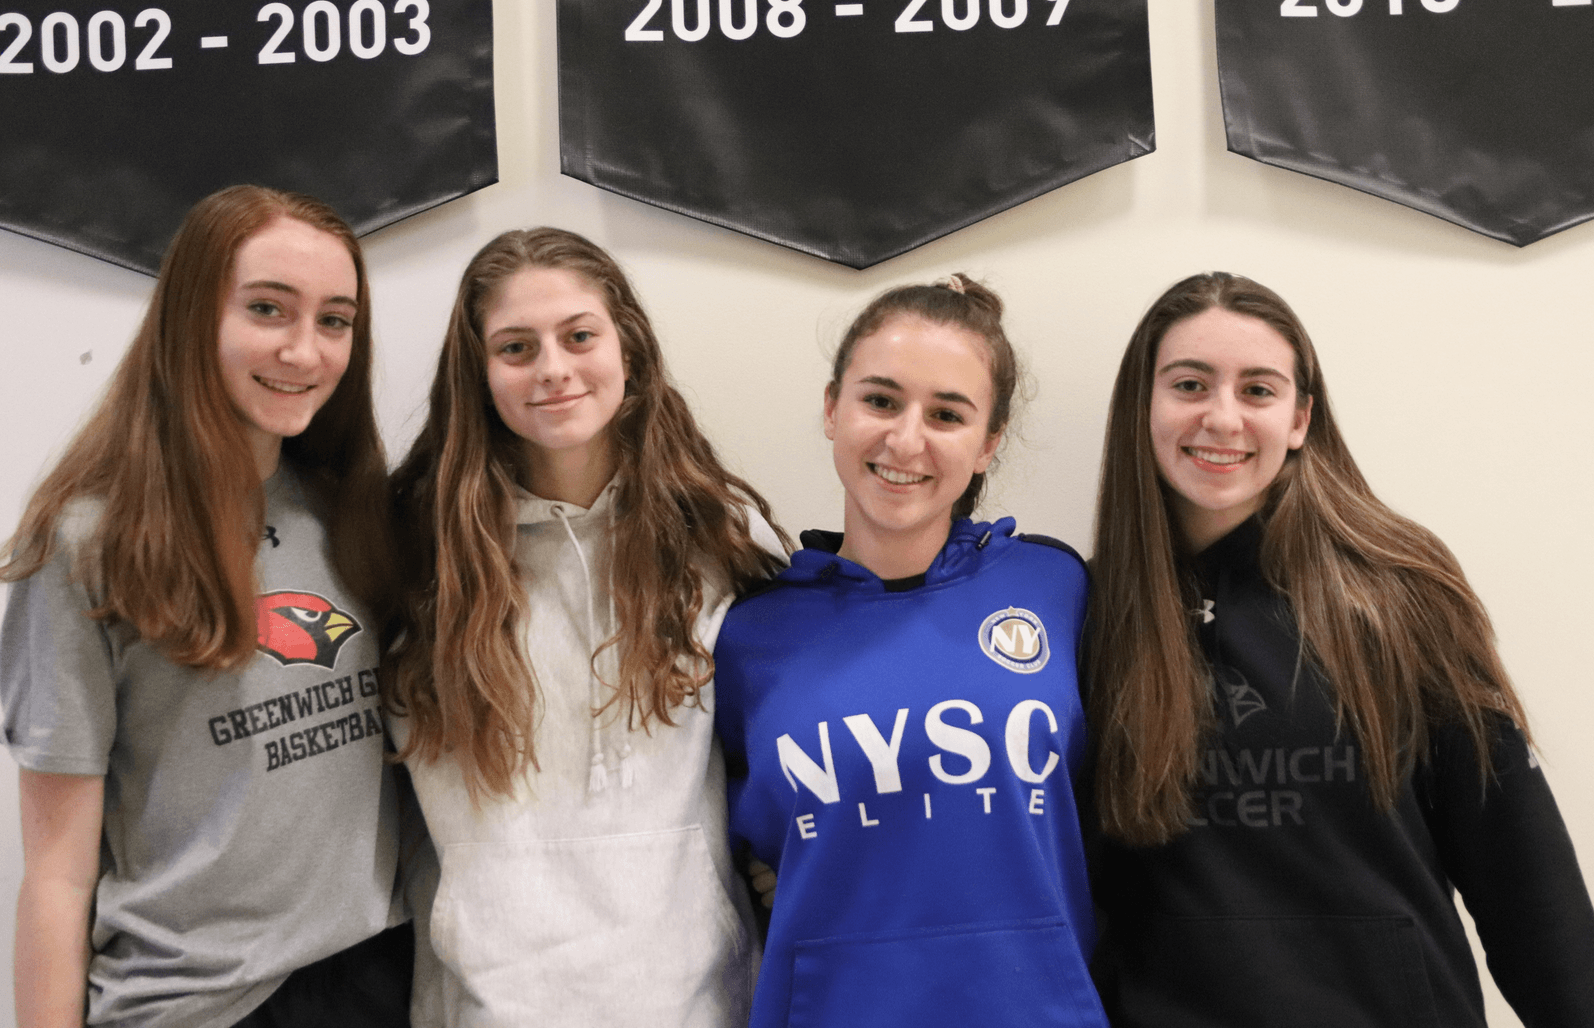 GHS girls basketball team captains Ciara Munnelly, Julia Conforti, Jordan Moses and Beatriz Owens. Feb 4, 2020 Photo: Leslie Yager